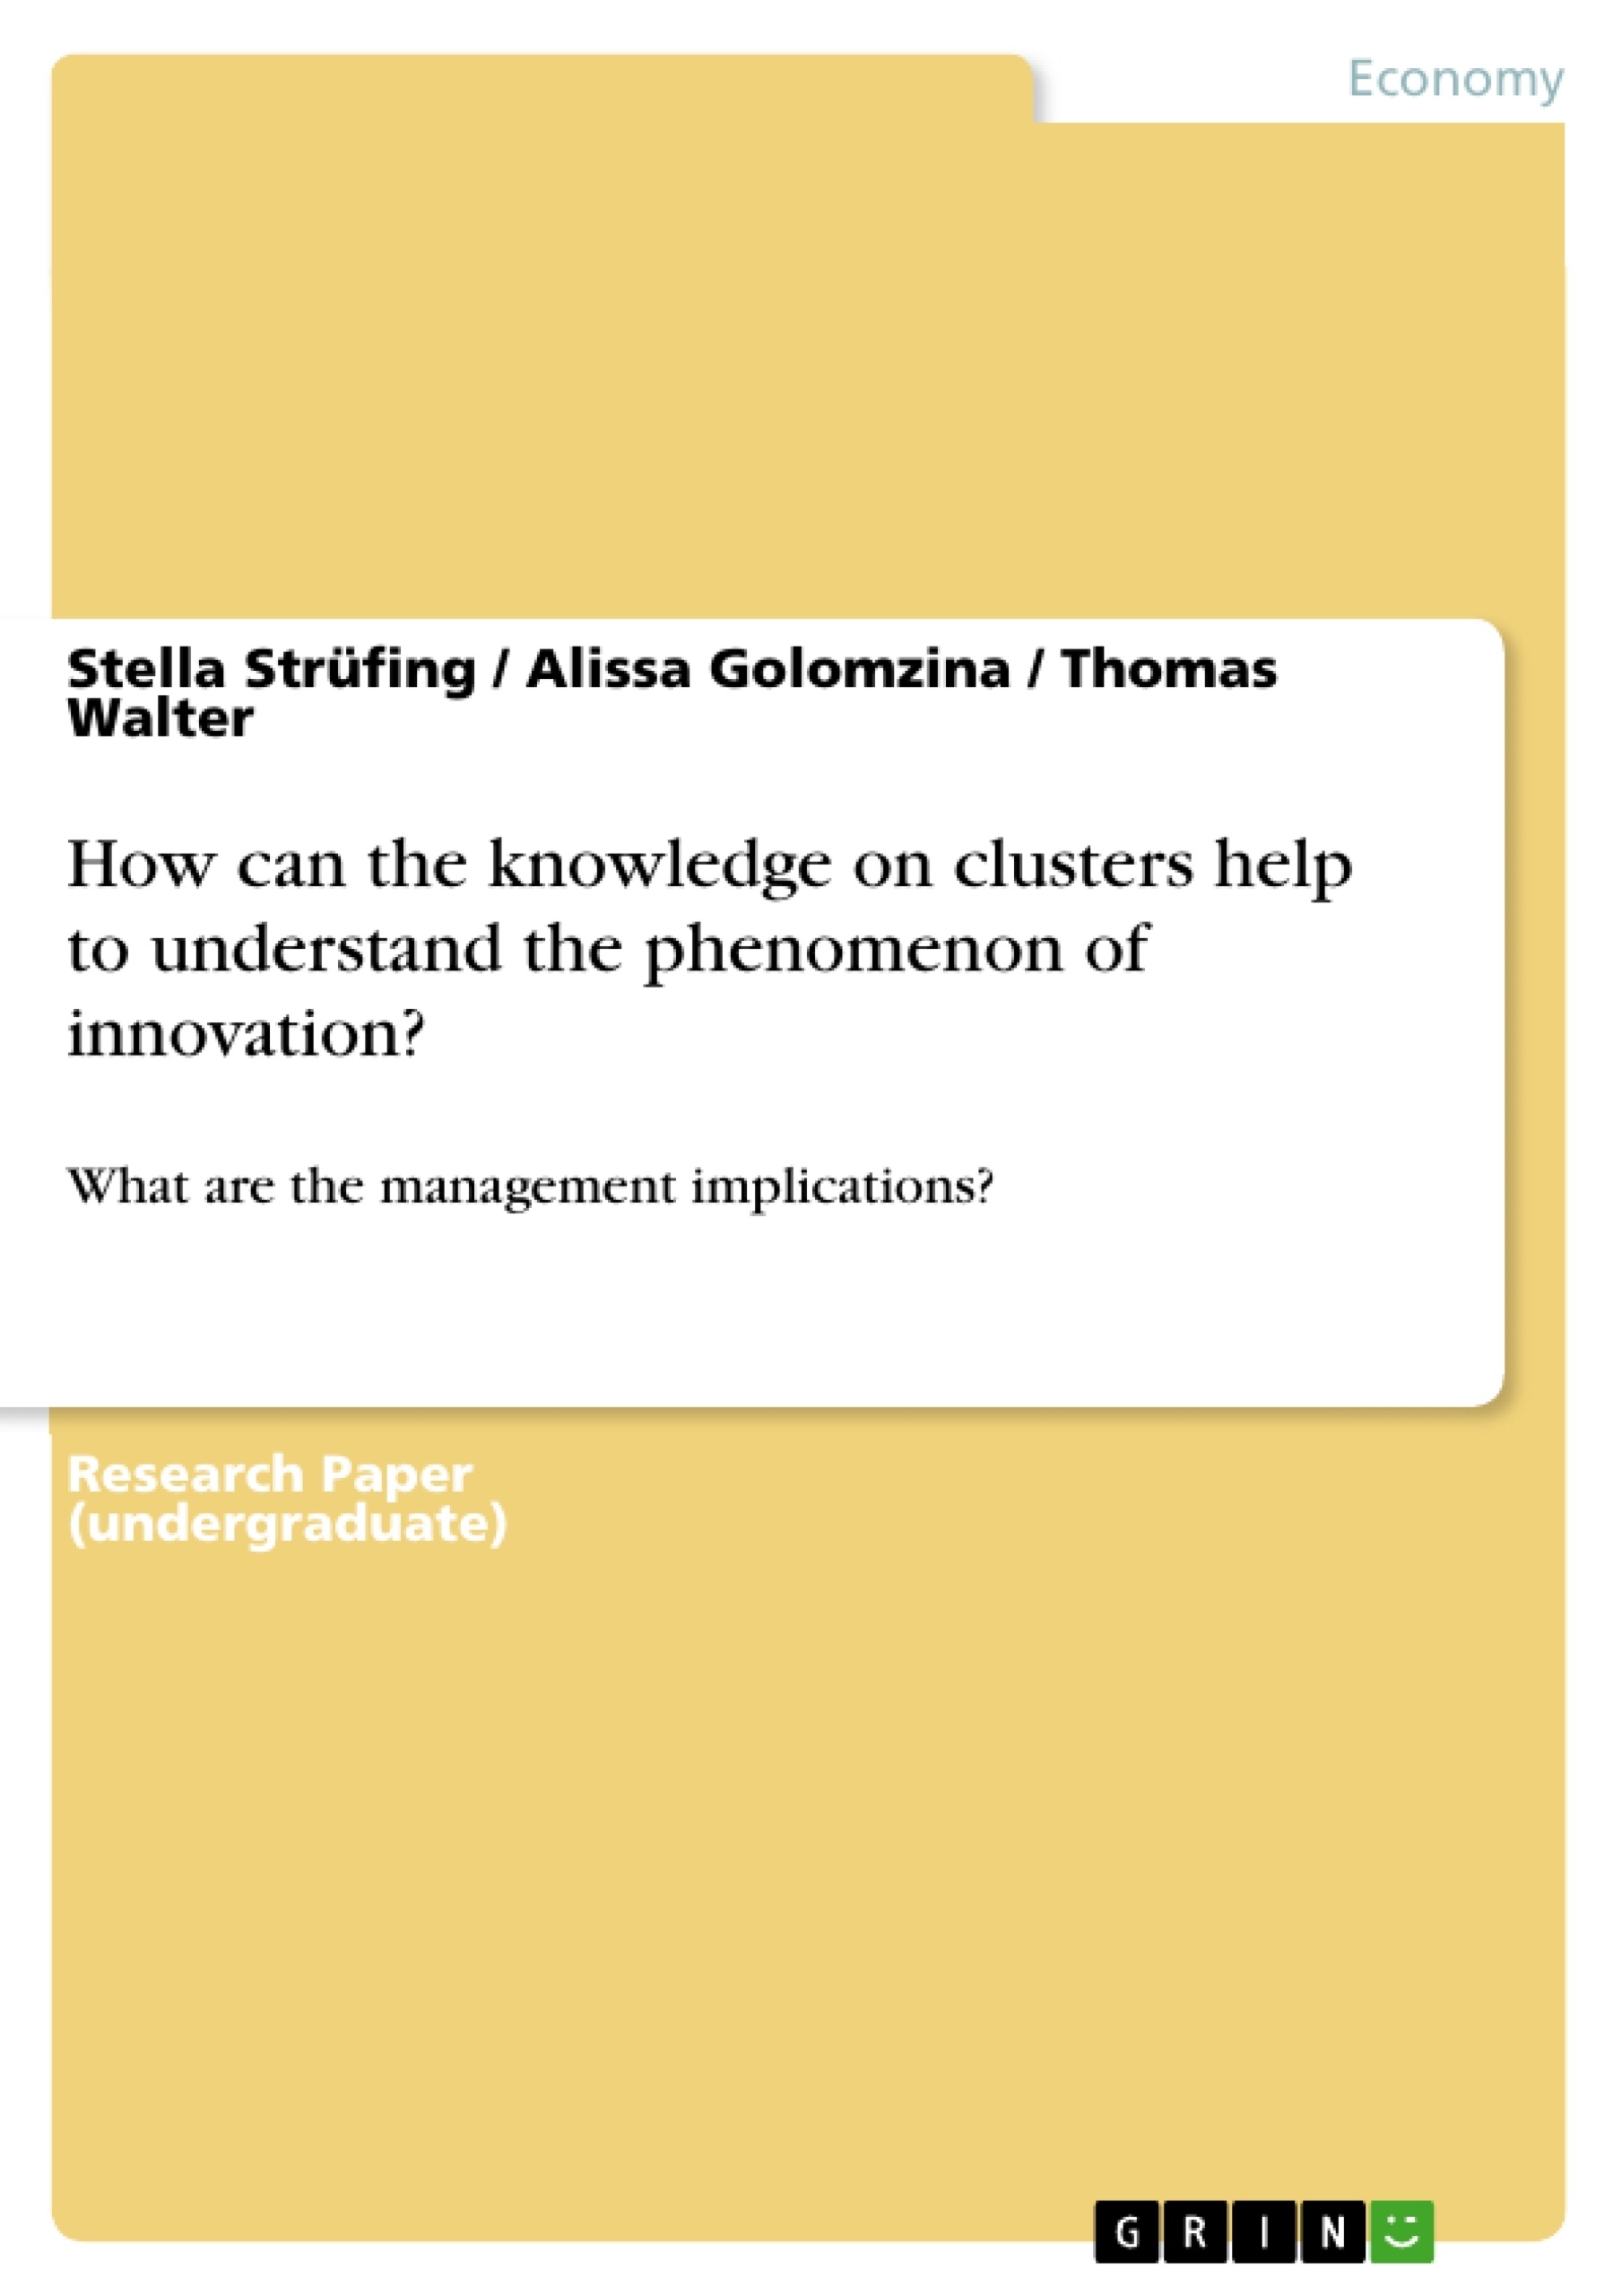 Título: How can the knowledge on clusters help to understand the phenomenon of innovation?